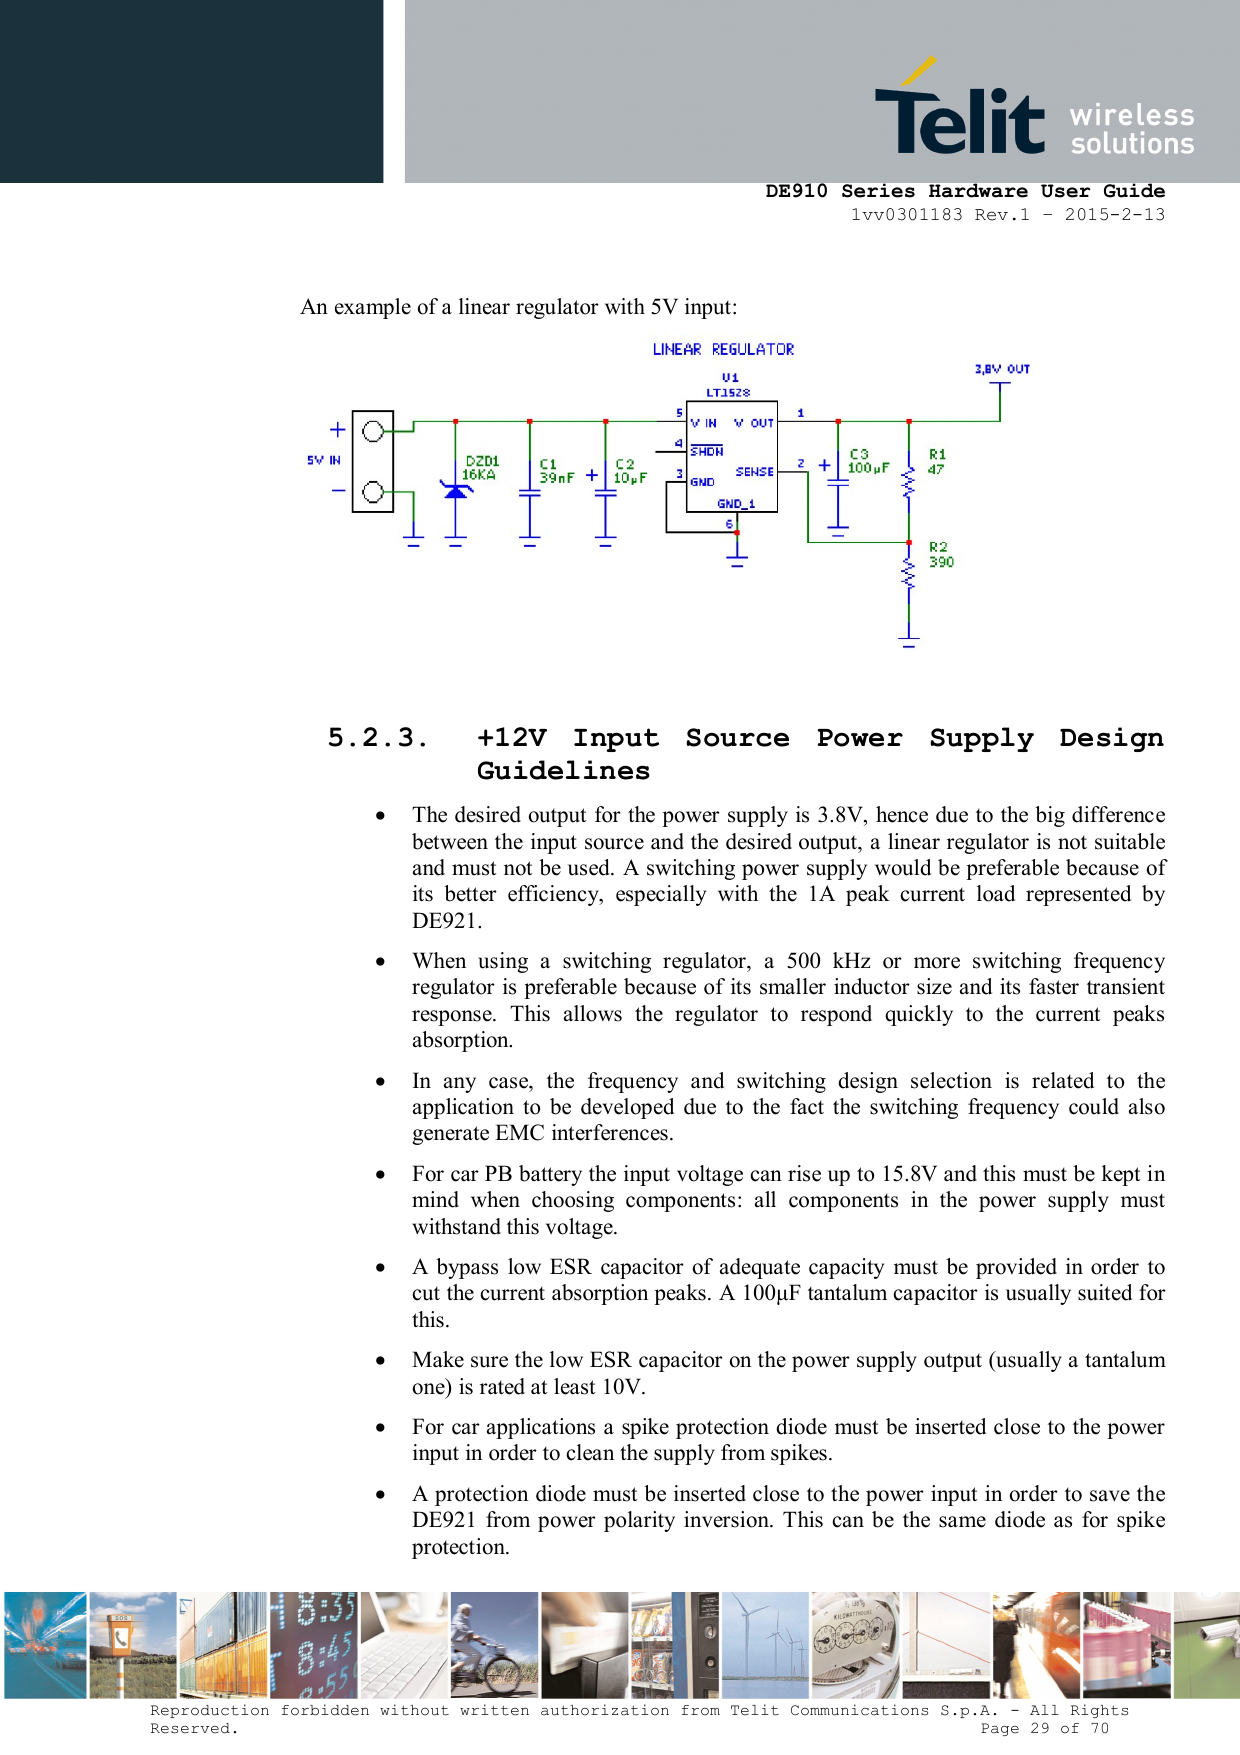      DE910 Series Hardware User Guide 1vv0301183 Rev.1 – 2015-2-13 Reproduction forbidden without written authorization from Telit Communications S.p.A. - All Rights Reserved.                                                                          Page 29 of 70  An example of a linear regulator with 5V input:   5.2.3. +12V  Input  Source  Power  Supply  Design Guidelines  The desired output for the power supply is 3.8V, hence due to the big difference between the input source and the desired output, a linear regulator is not suitable and must not be used. A switching power supply would be preferable because of its  better  efficiency,  especially  with  the  1A  peak  current  load  represented  by DE921.  When  using  a  switching  regulator,  a  500  kHz  or  more  switching  frequency regulator is preferable because of its smaller inductor size and its faster transient response.  This  allows  the  regulator  to  respond  quickly  to  the  current  peaks absorption.   In  any  case,  the  frequency  and  switching  design  selection  is  related  to  the application  to  be  developed  due  to  the  fact  the  switching  frequency  could  also generate EMC interferences.  For car PB battery the input voltage can rise up to 15.8V and this must be kept in mind  when  choosing  components:  all  components  in  the  power  supply  must withstand this voltage.  A  bypass  low  ESR  capacitor  of adequate capacity  must  be  provided  in  order  to cut the current absorption peaks. A 100μF tantalum capacitor is usually suited for this.  Make sure the low ESR capacitor on the power supply output (usually a tantalum one) is rated at least 10V.  For car applications a spike protection diode  must be inserted close to the power input in order to clean the supply from spikes.   A protection diode must be inserted close to the power input in order to save the DE921 from  power  polarity inversion.  This  can  be the same  diode as  for  spike protection. 